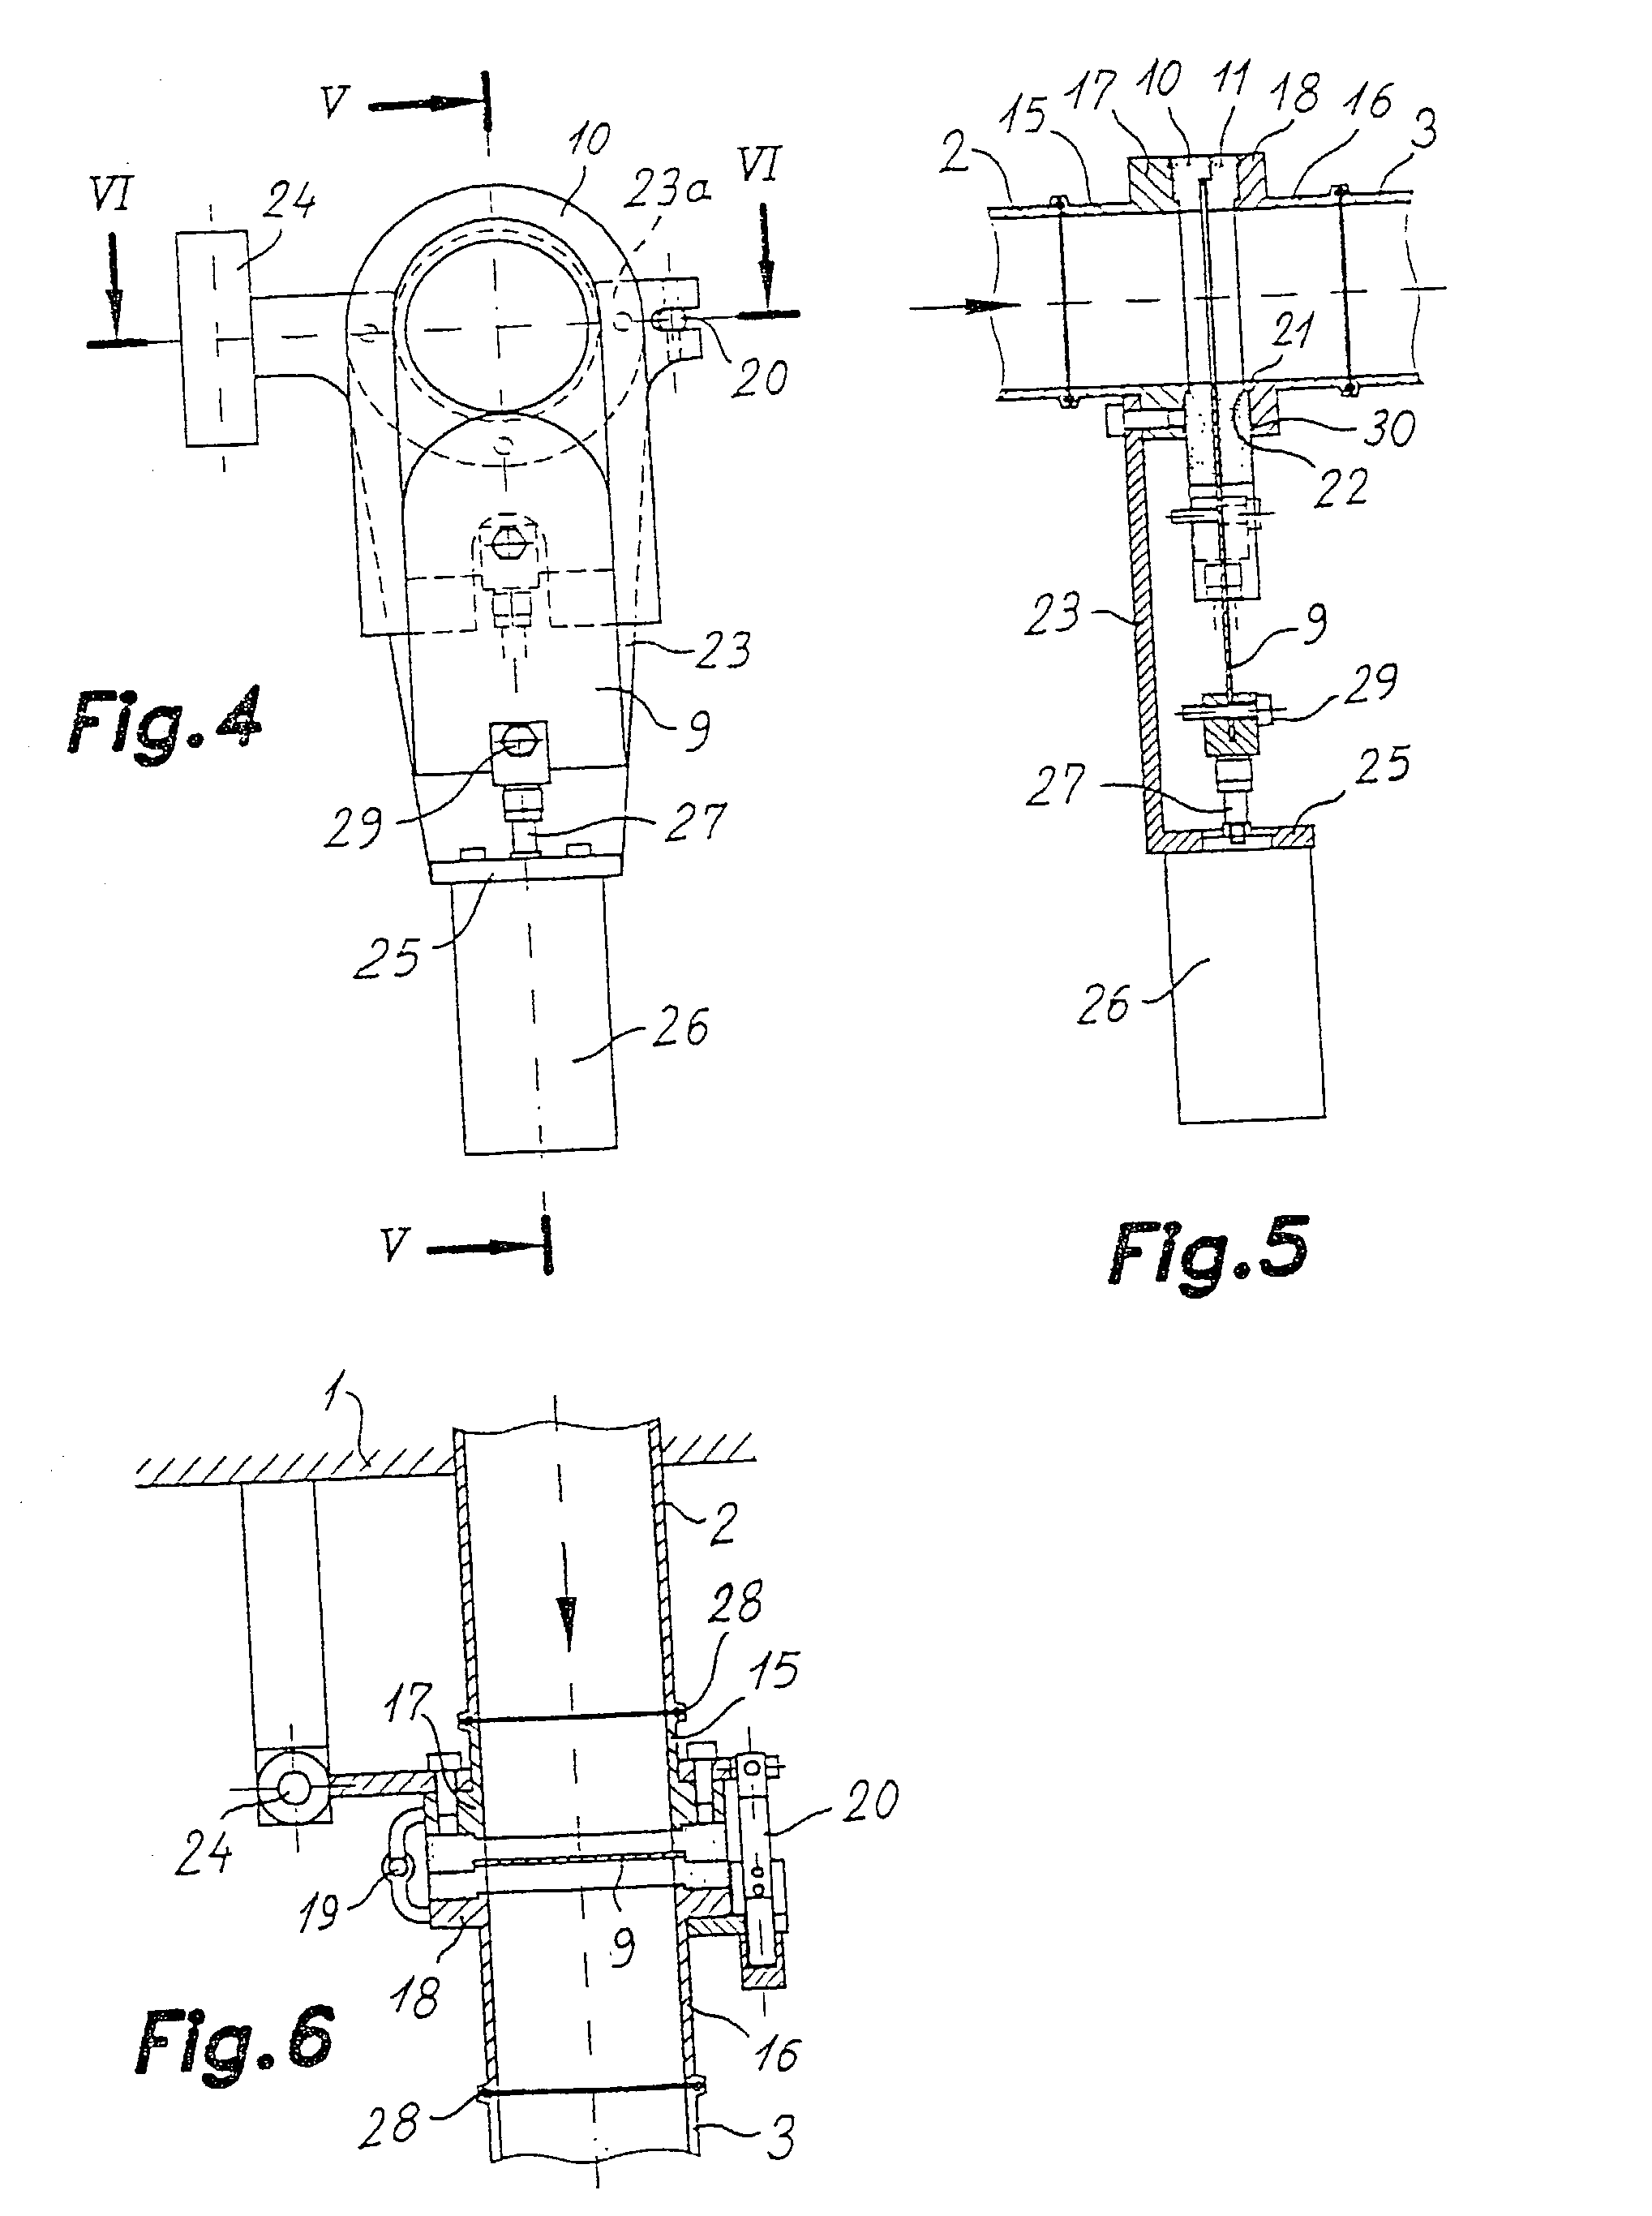 Method and device for stuffing meat product sealed by stapling